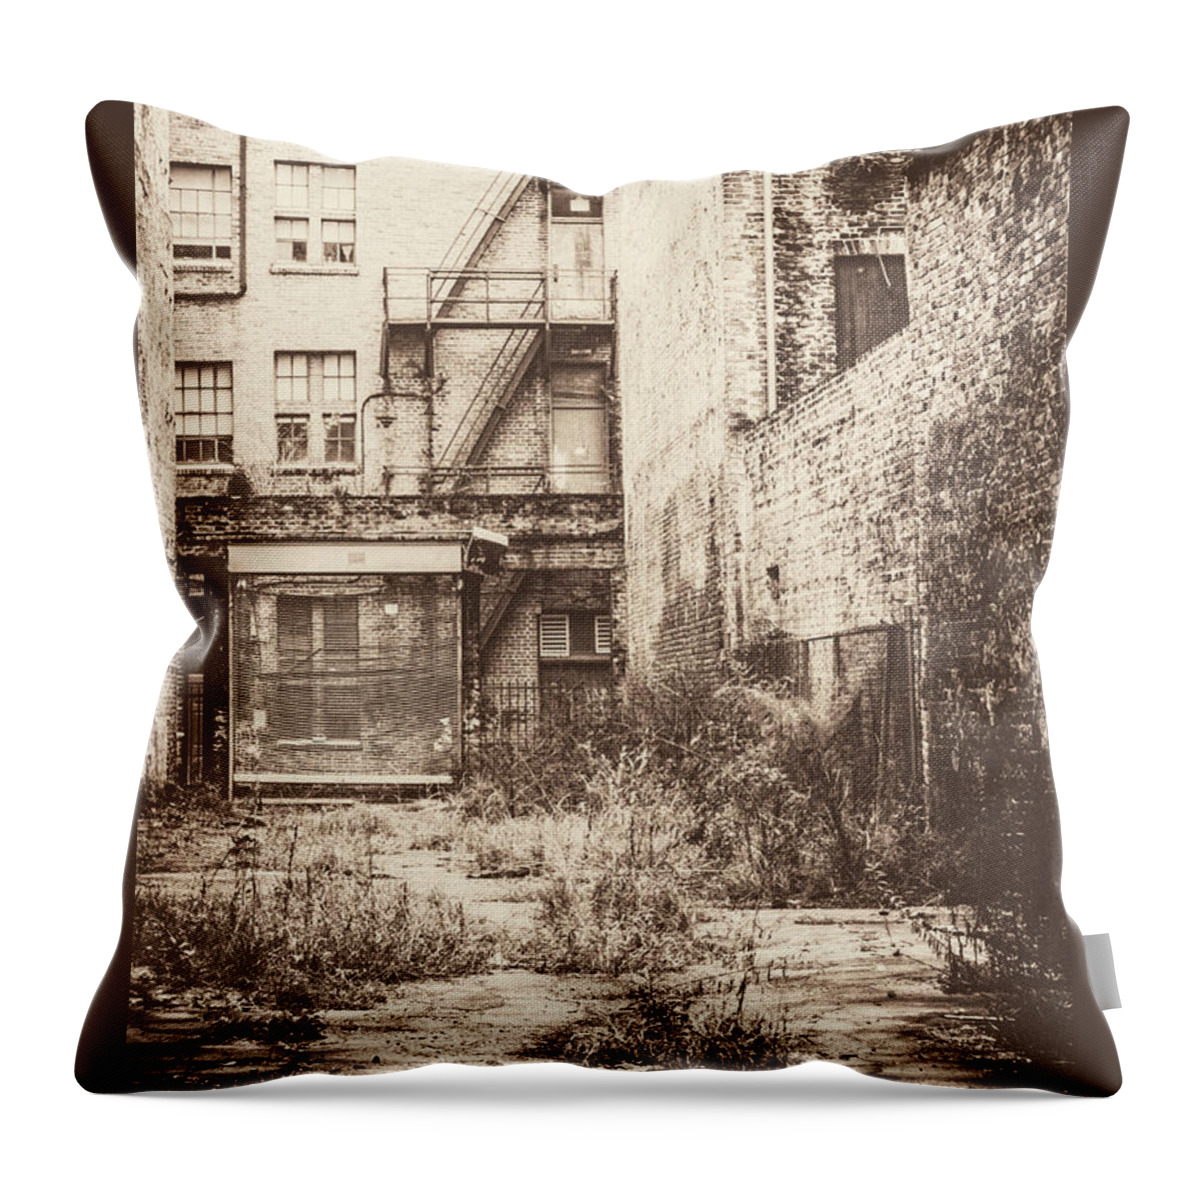 Deterioration Throw Pillow featuring the photograph Poetic Deterioration by Frances Ann Hattier